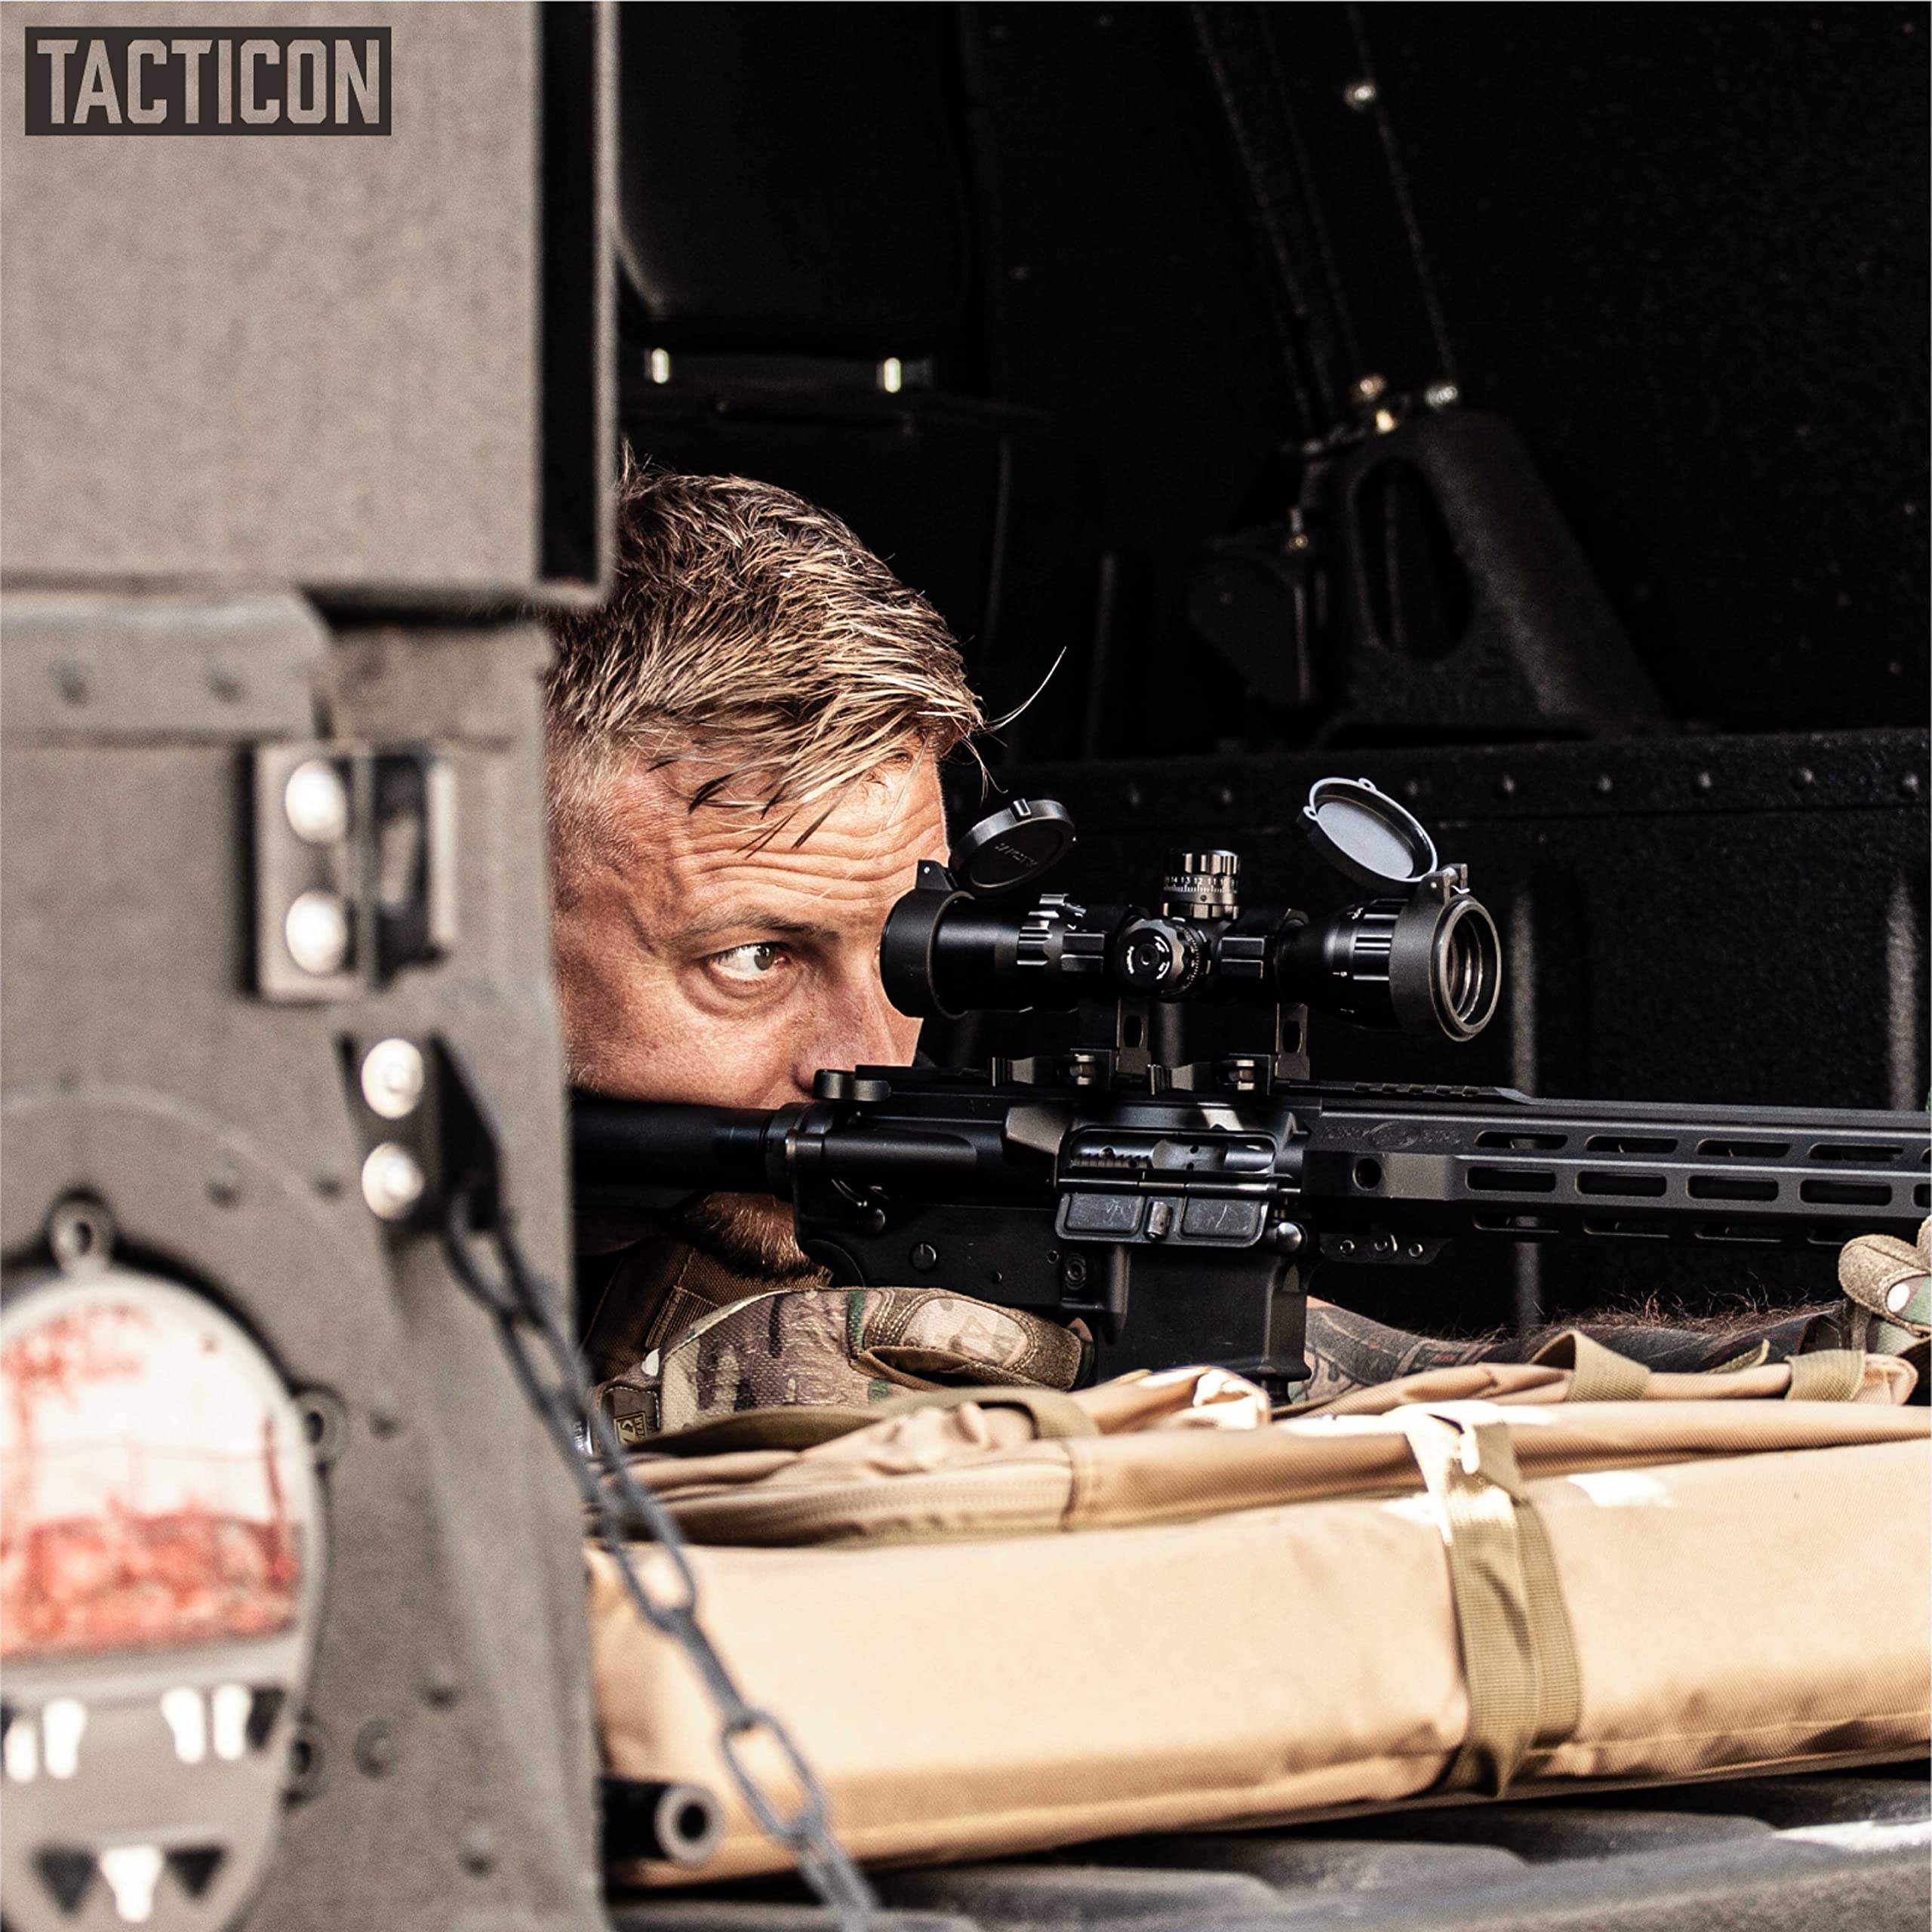 Tacticon Falcon V3 3-9x32mm Rifle Scope with QD Mounts | Disabled Combat Veteran Owned Company | Magnified Optics Gun Scopes with Red Green or Blue Illuminated Mil-Dot Reticle | Tactical Accessories